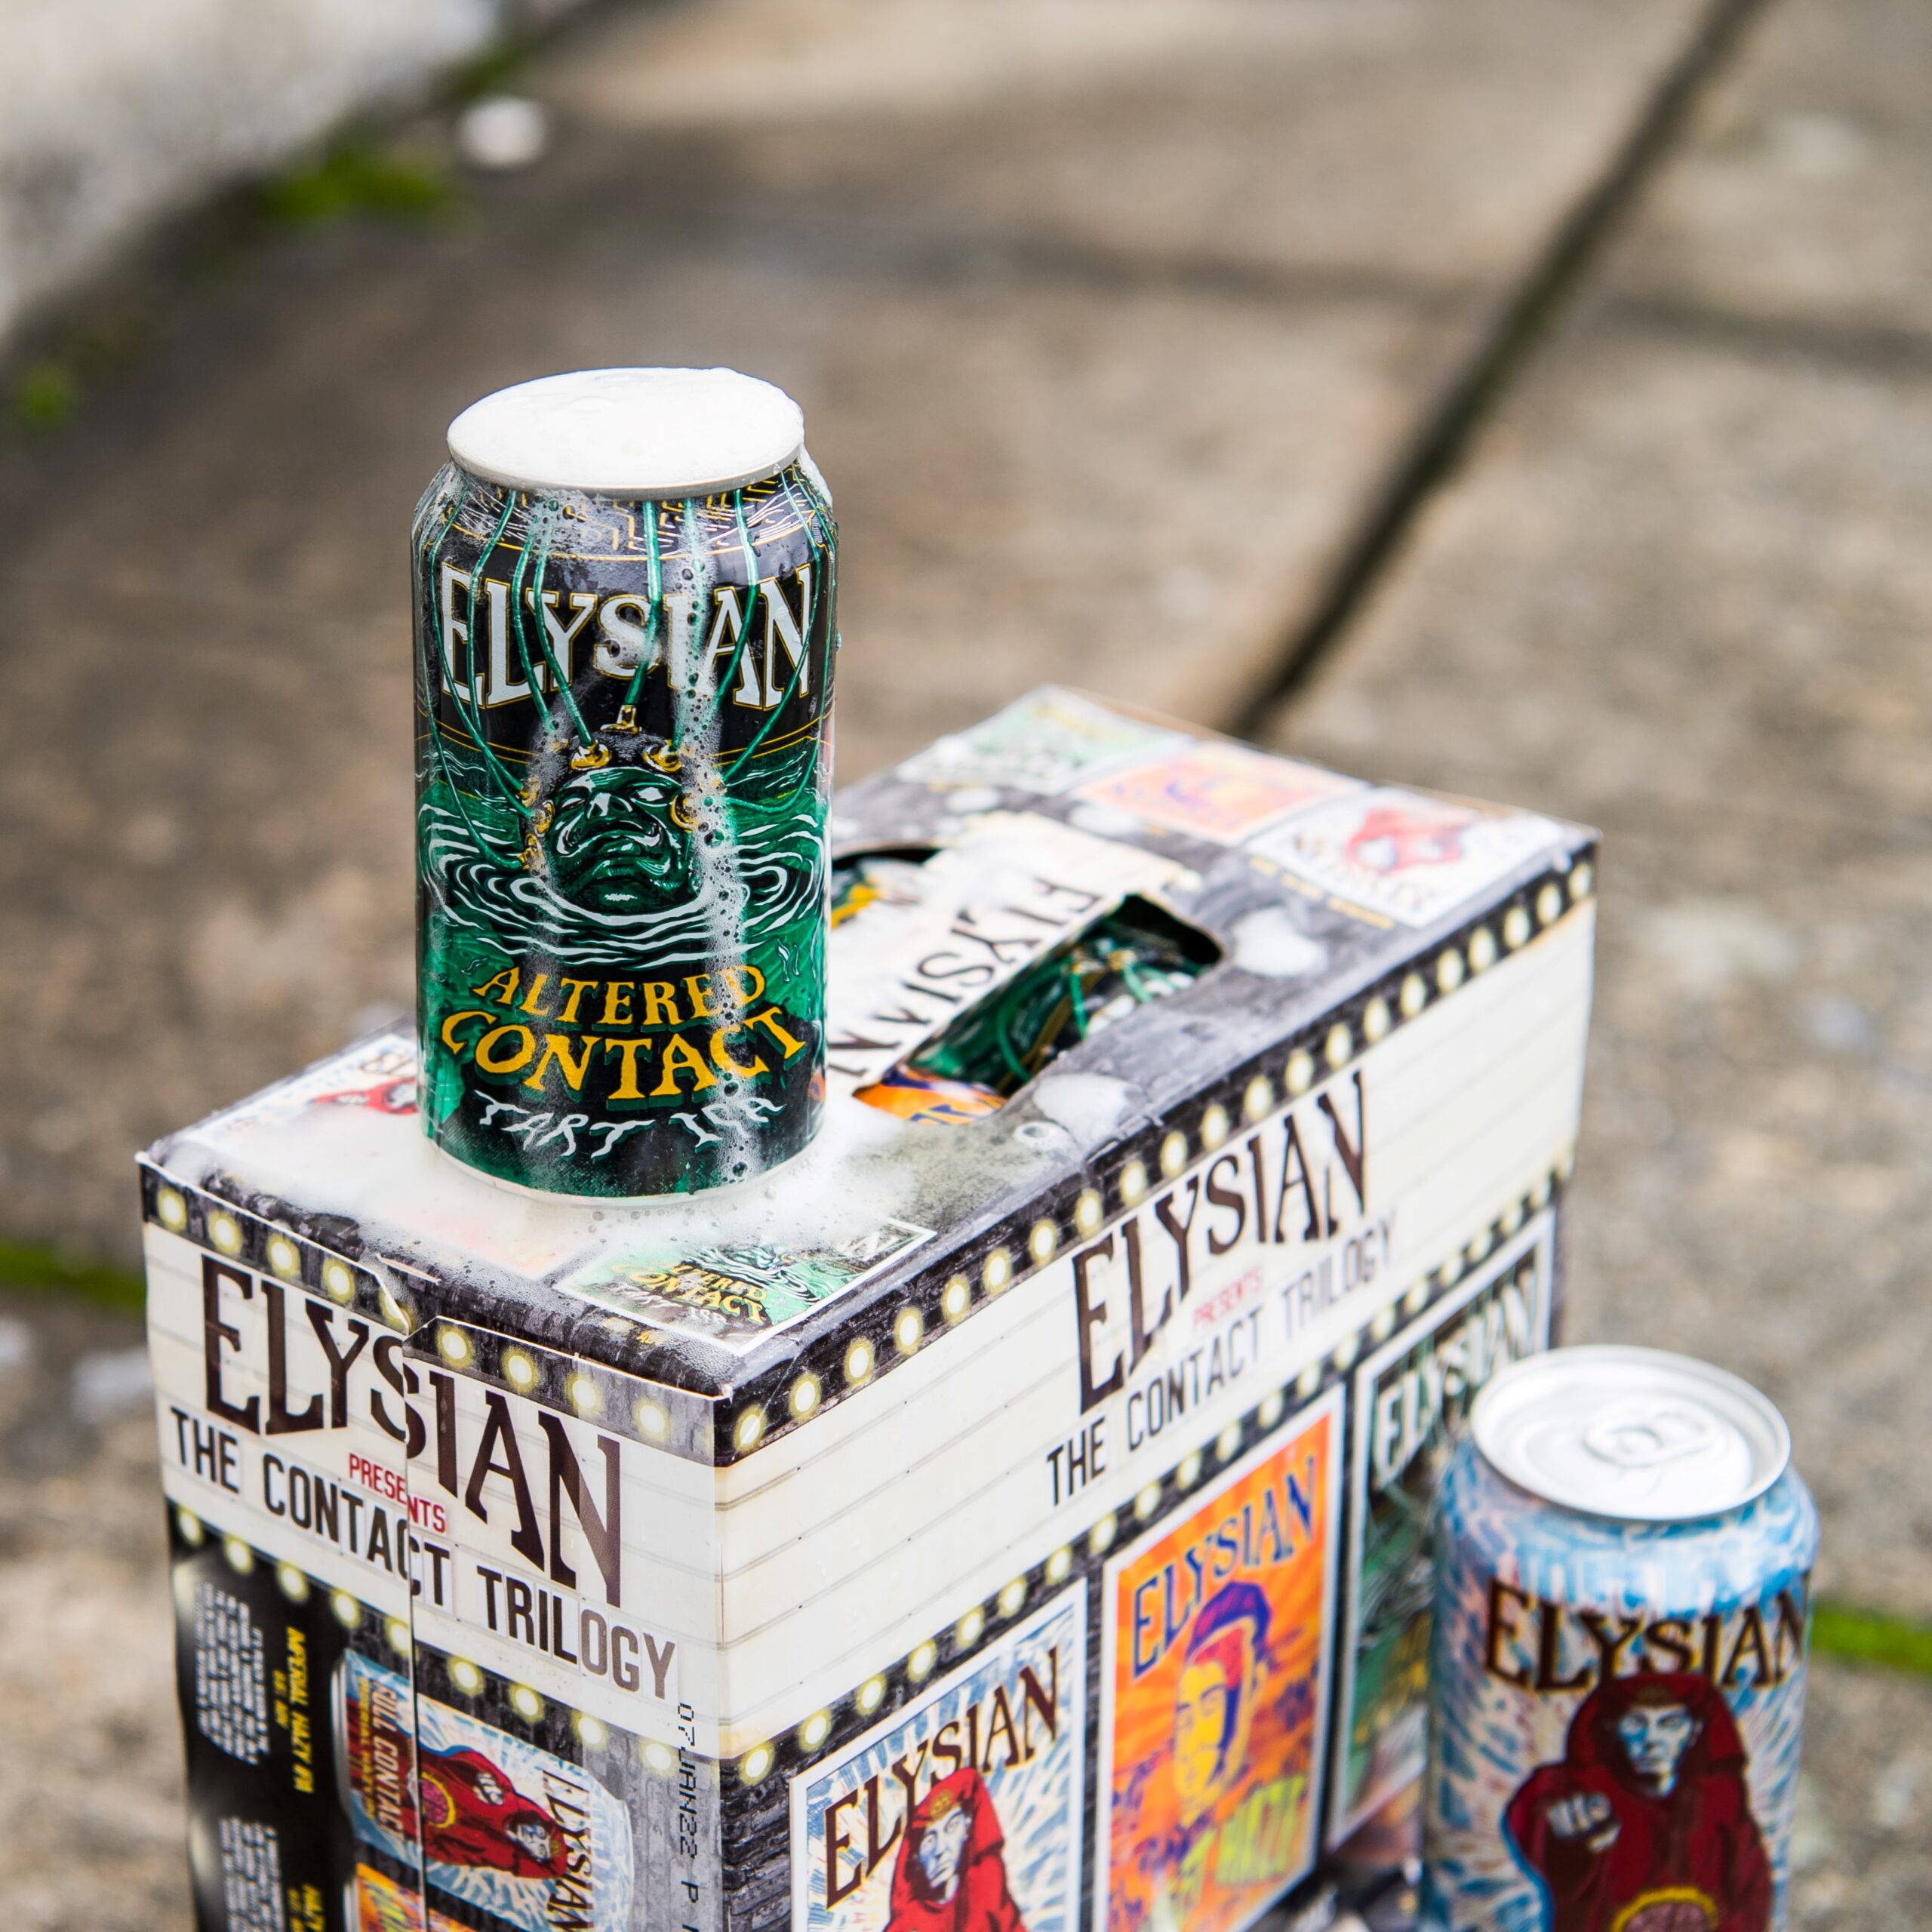 Elysian Brewing via M&C Saatchi Entertainment for use by 360 Magazine